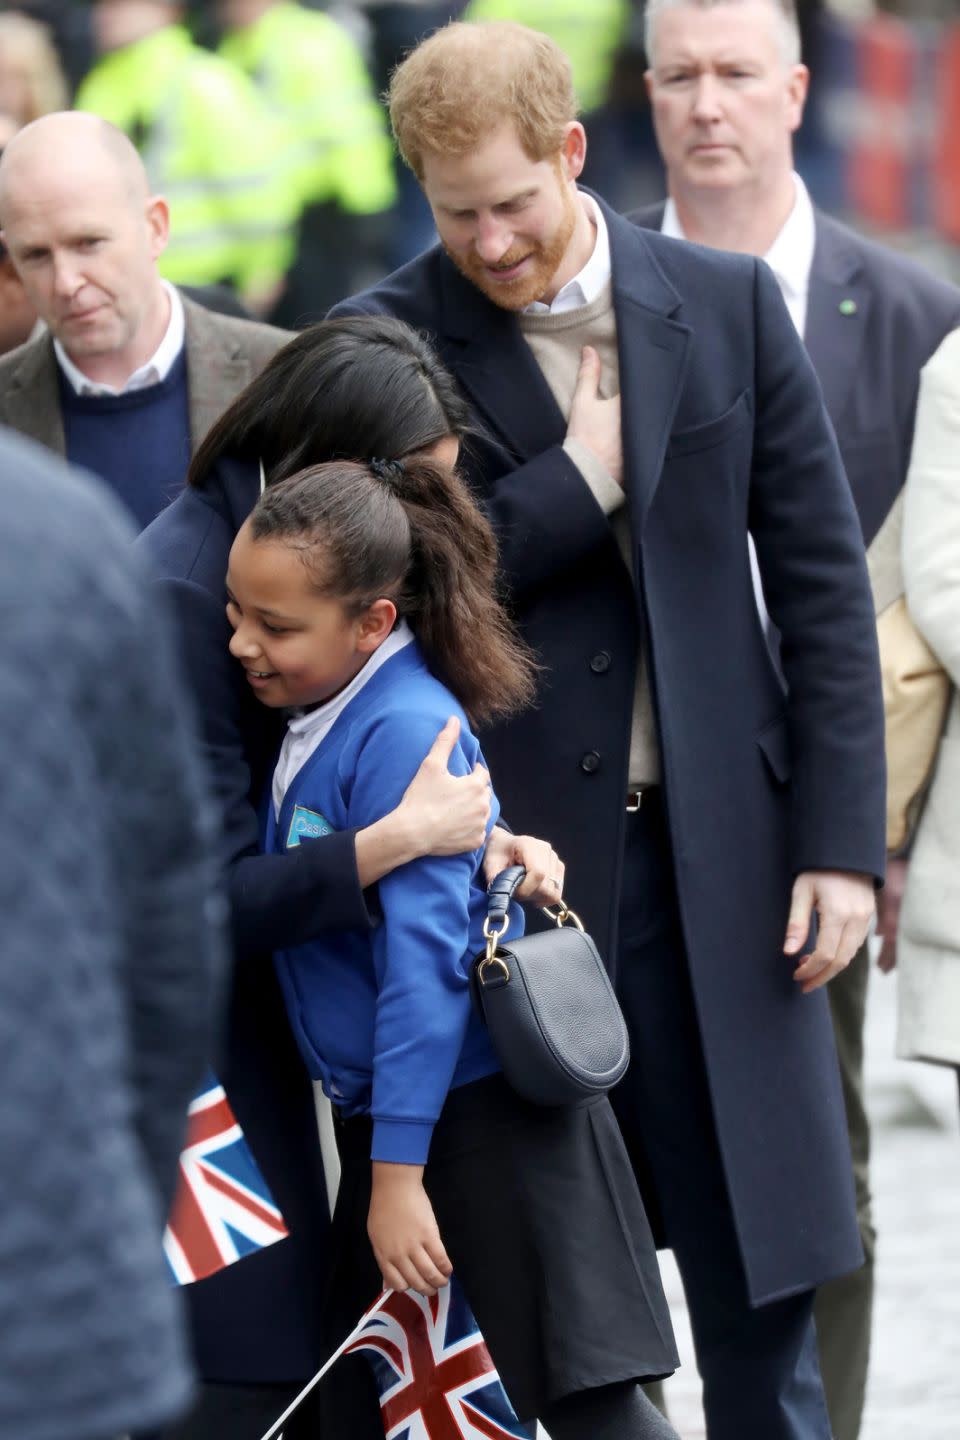 The young girl couldn't believe her luck when Prince Harry pulled her out of the crowd. Photo: Getty Images